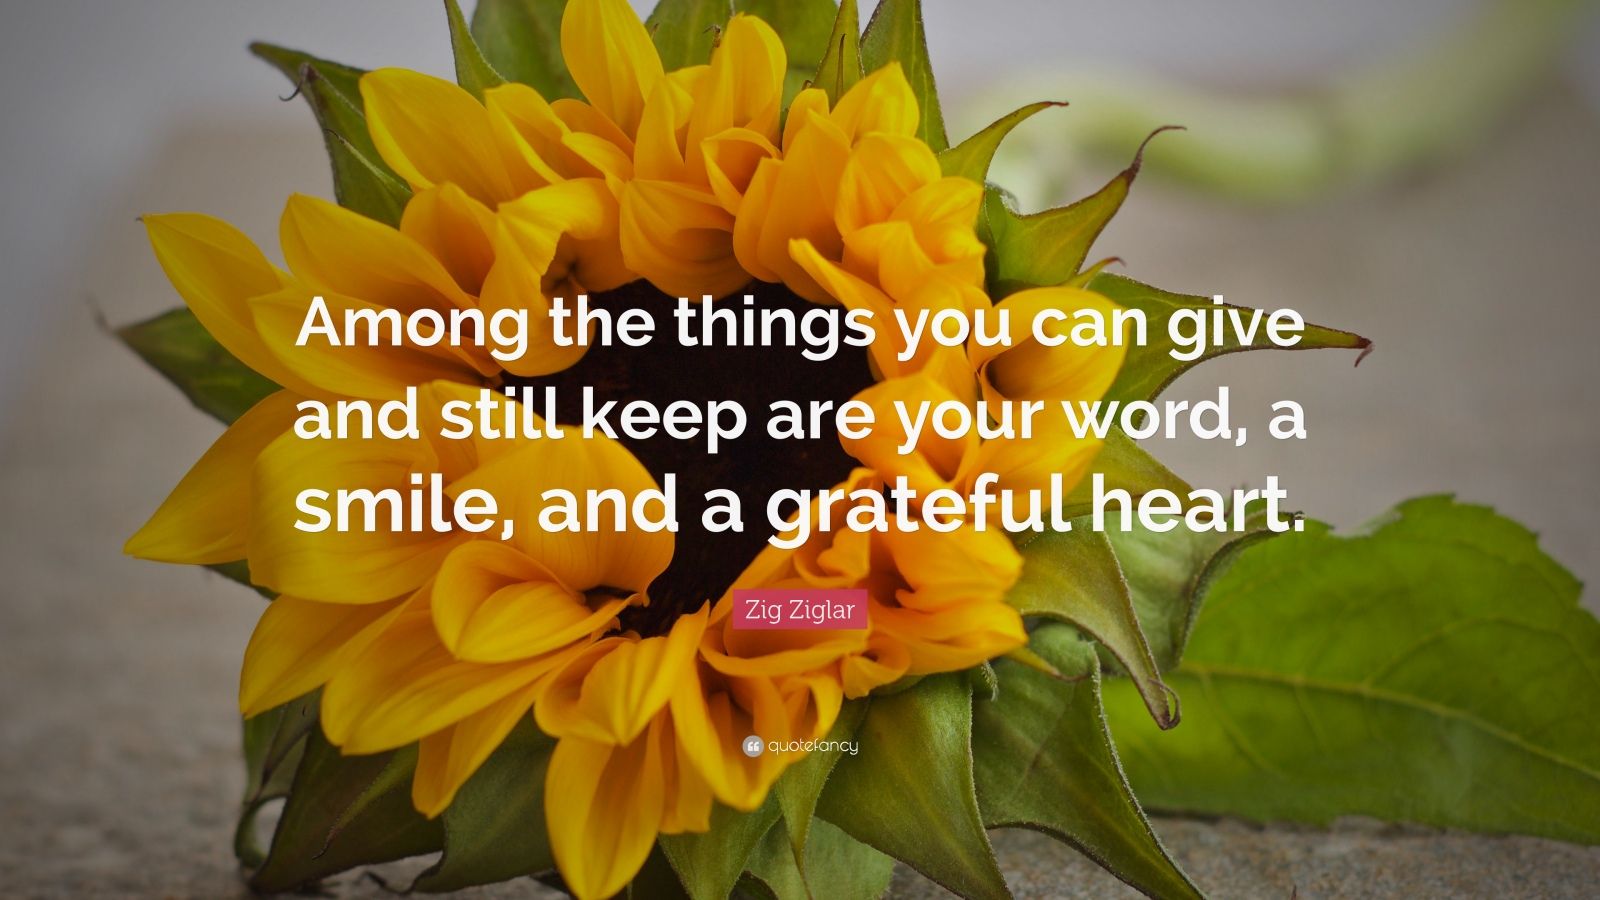 Zig Ziglar Quote: “Among the things you can give and still keep are